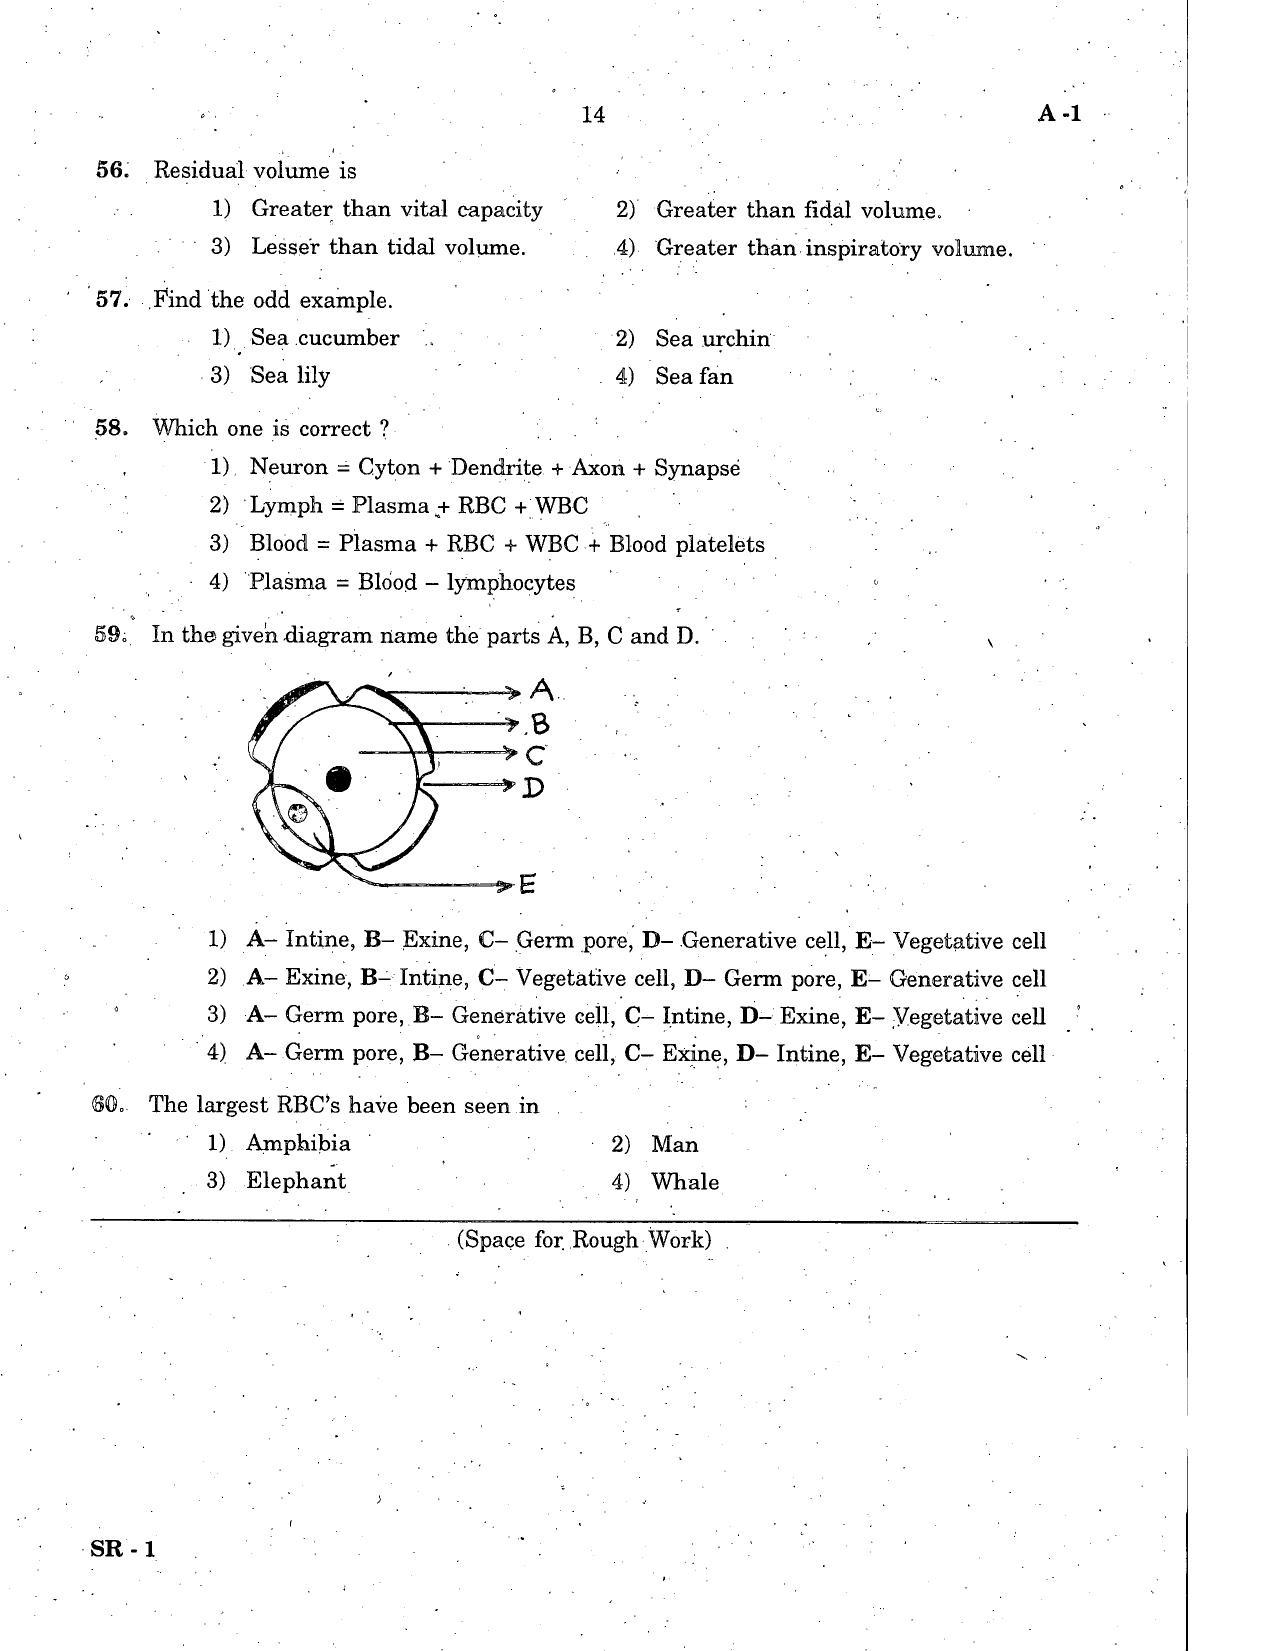 KCET Biology 2007 Question Papers - Page 14